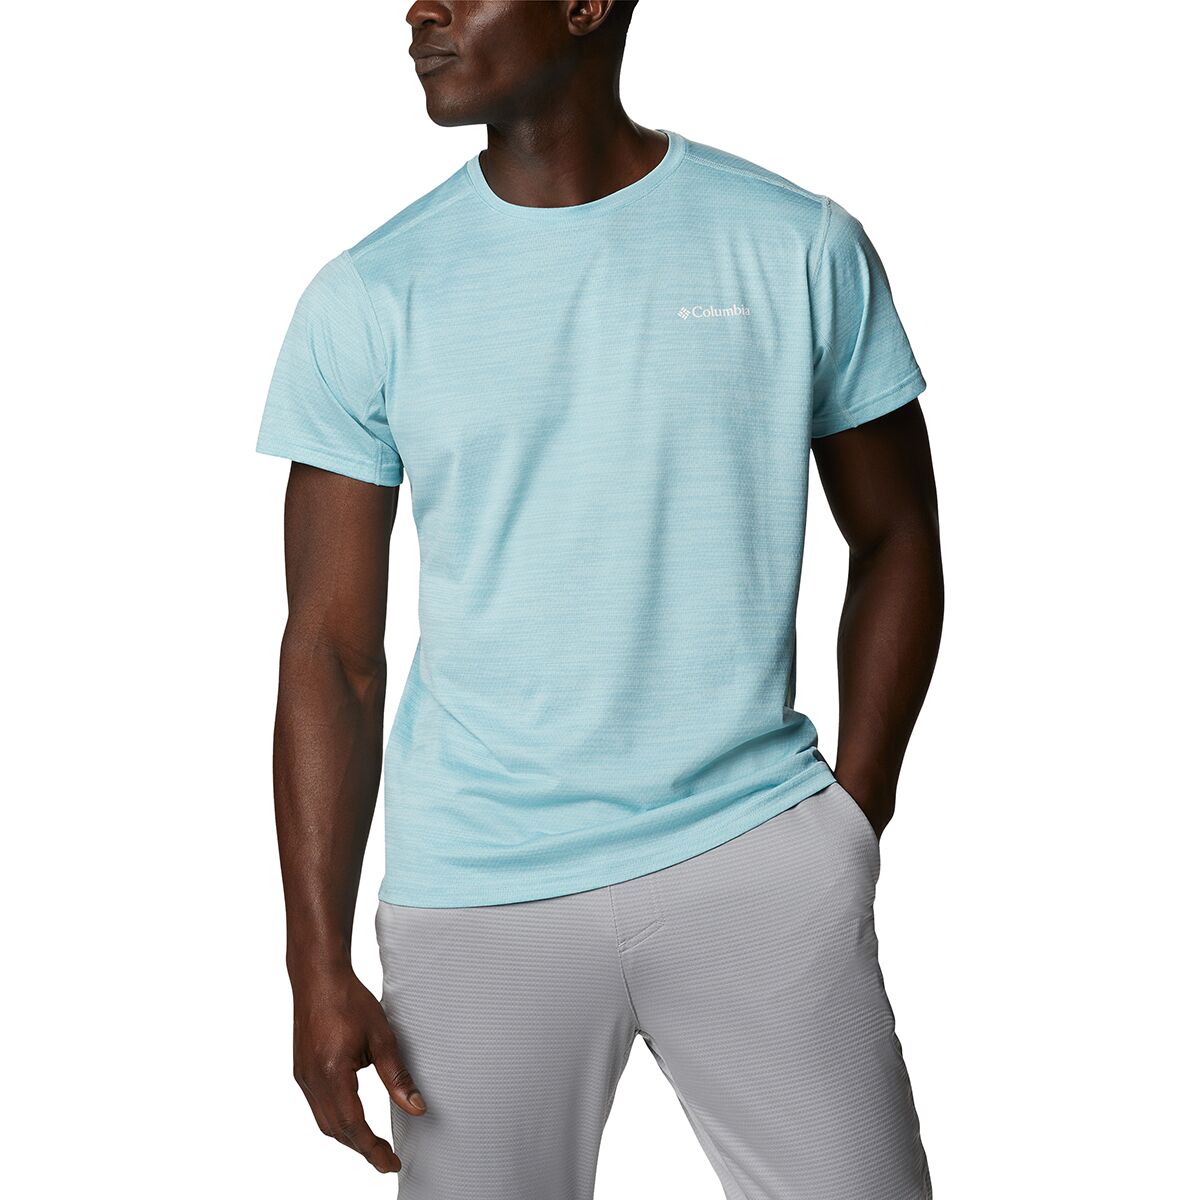 Columbia Men's T-Shirts and short-sleeves, stylish comfort clothing